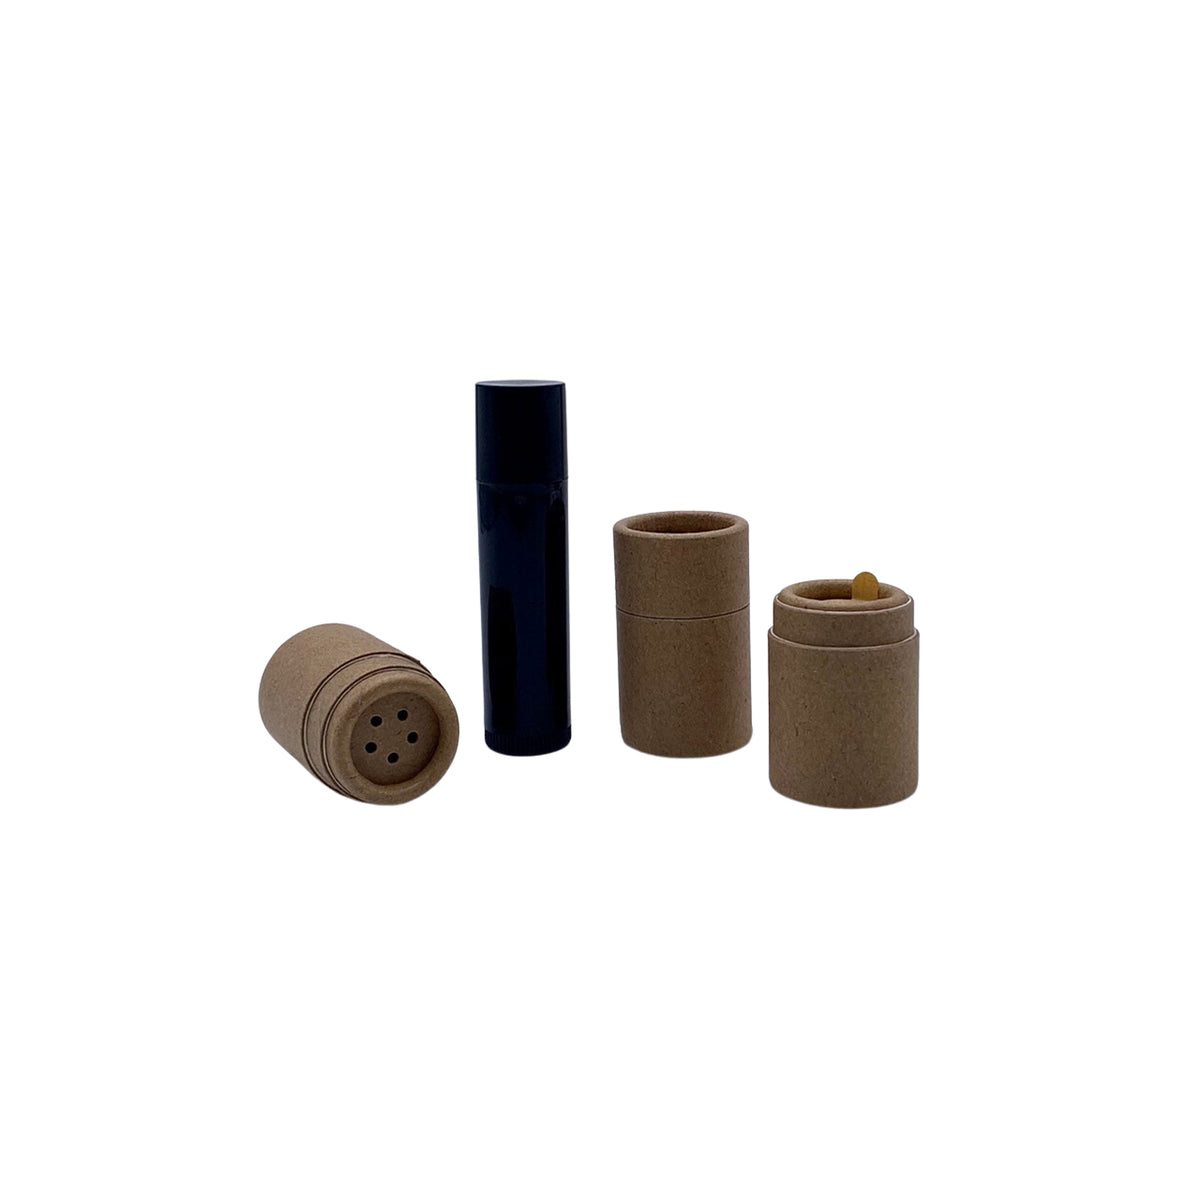 4 ounce / 115 g Paper Shaker Tube – GreenWay Containers